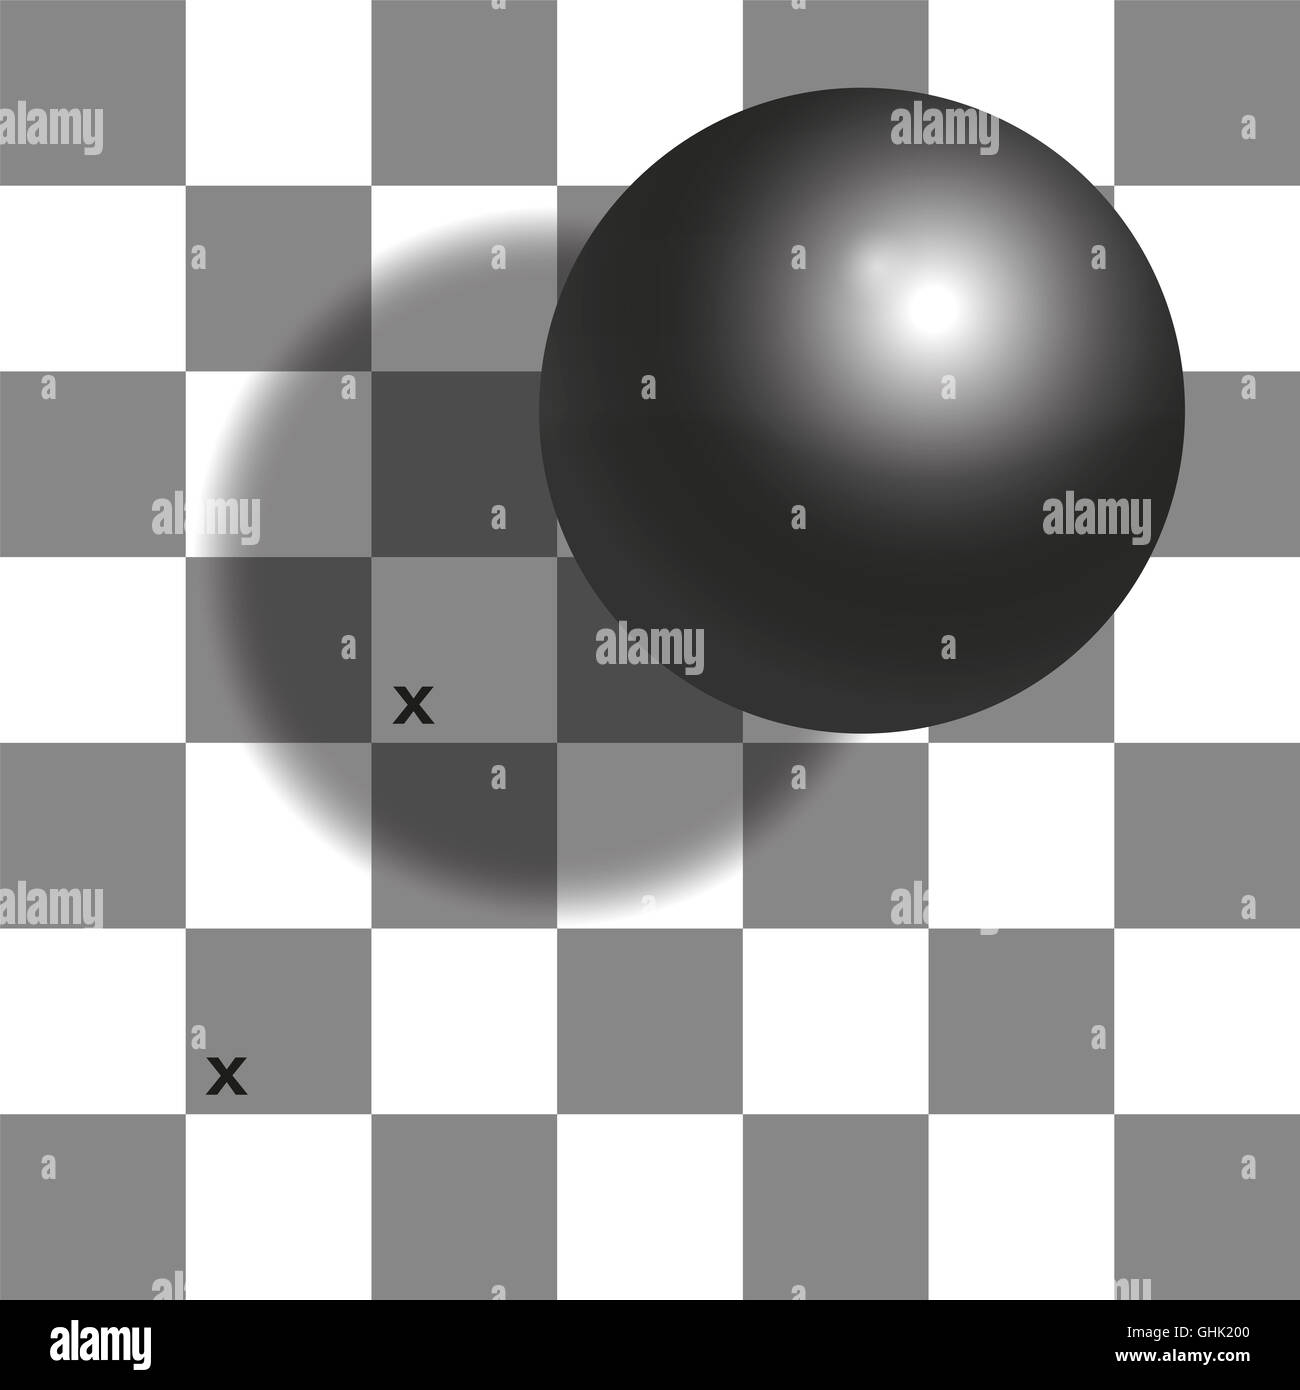 Checker shadow illusion - the two squares with x mark are the same shade of gray. Stock Photo